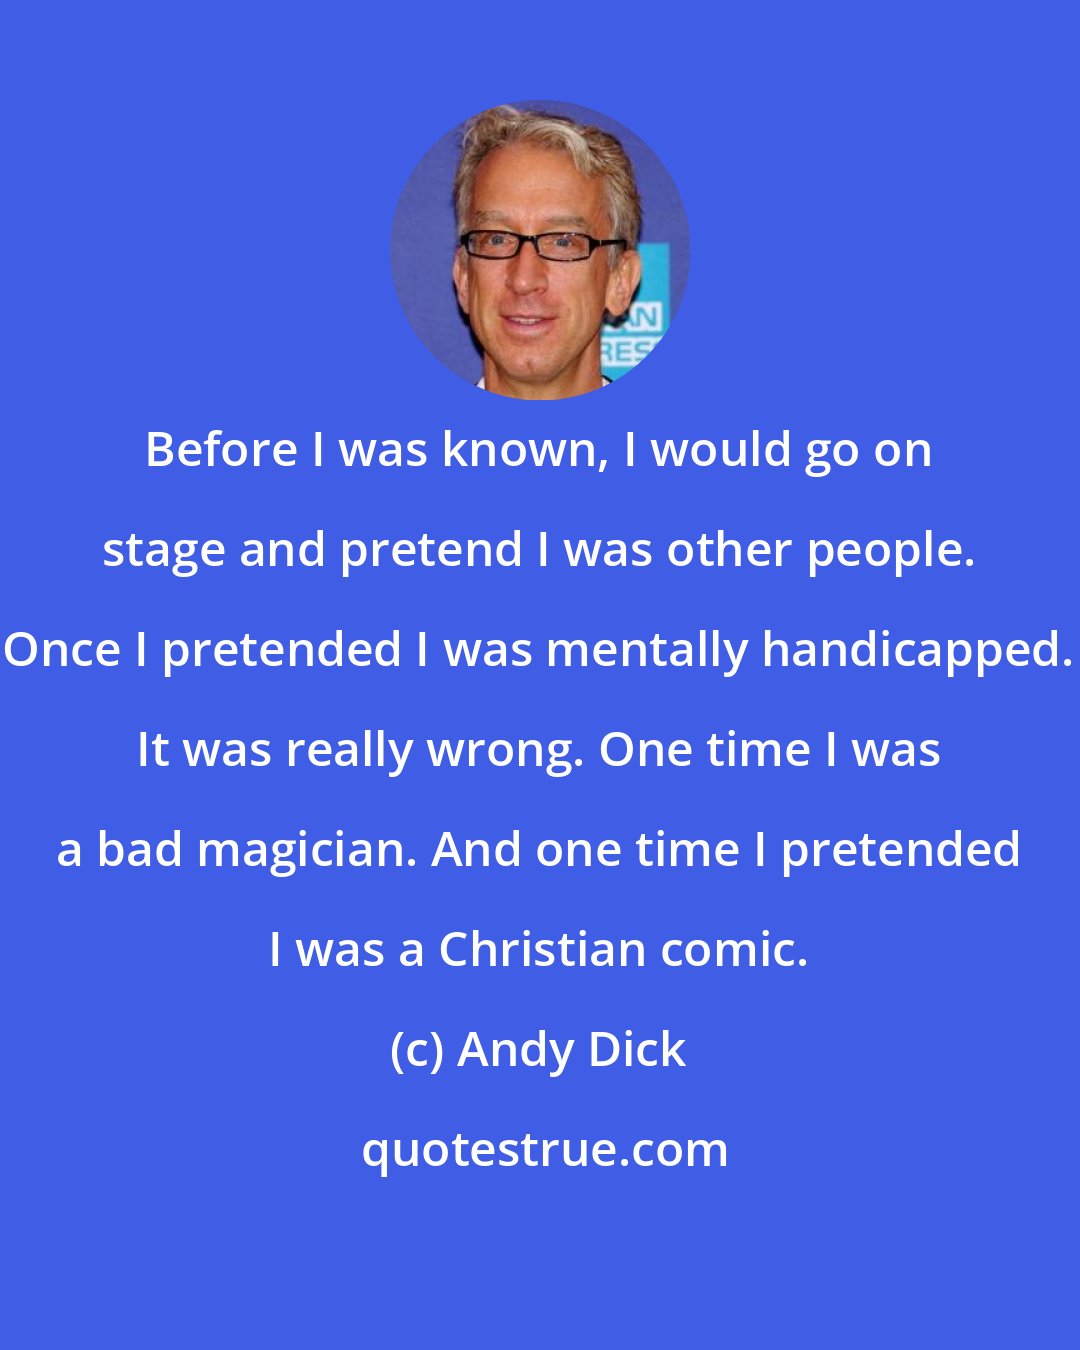 Andy Dick: Before I was known, I would go on stage and pretend I was other people. Once I pretended I was mentally handicapped. It was really wrong. One time I was a bad magician. And one time I pretended I was a Christian comic.